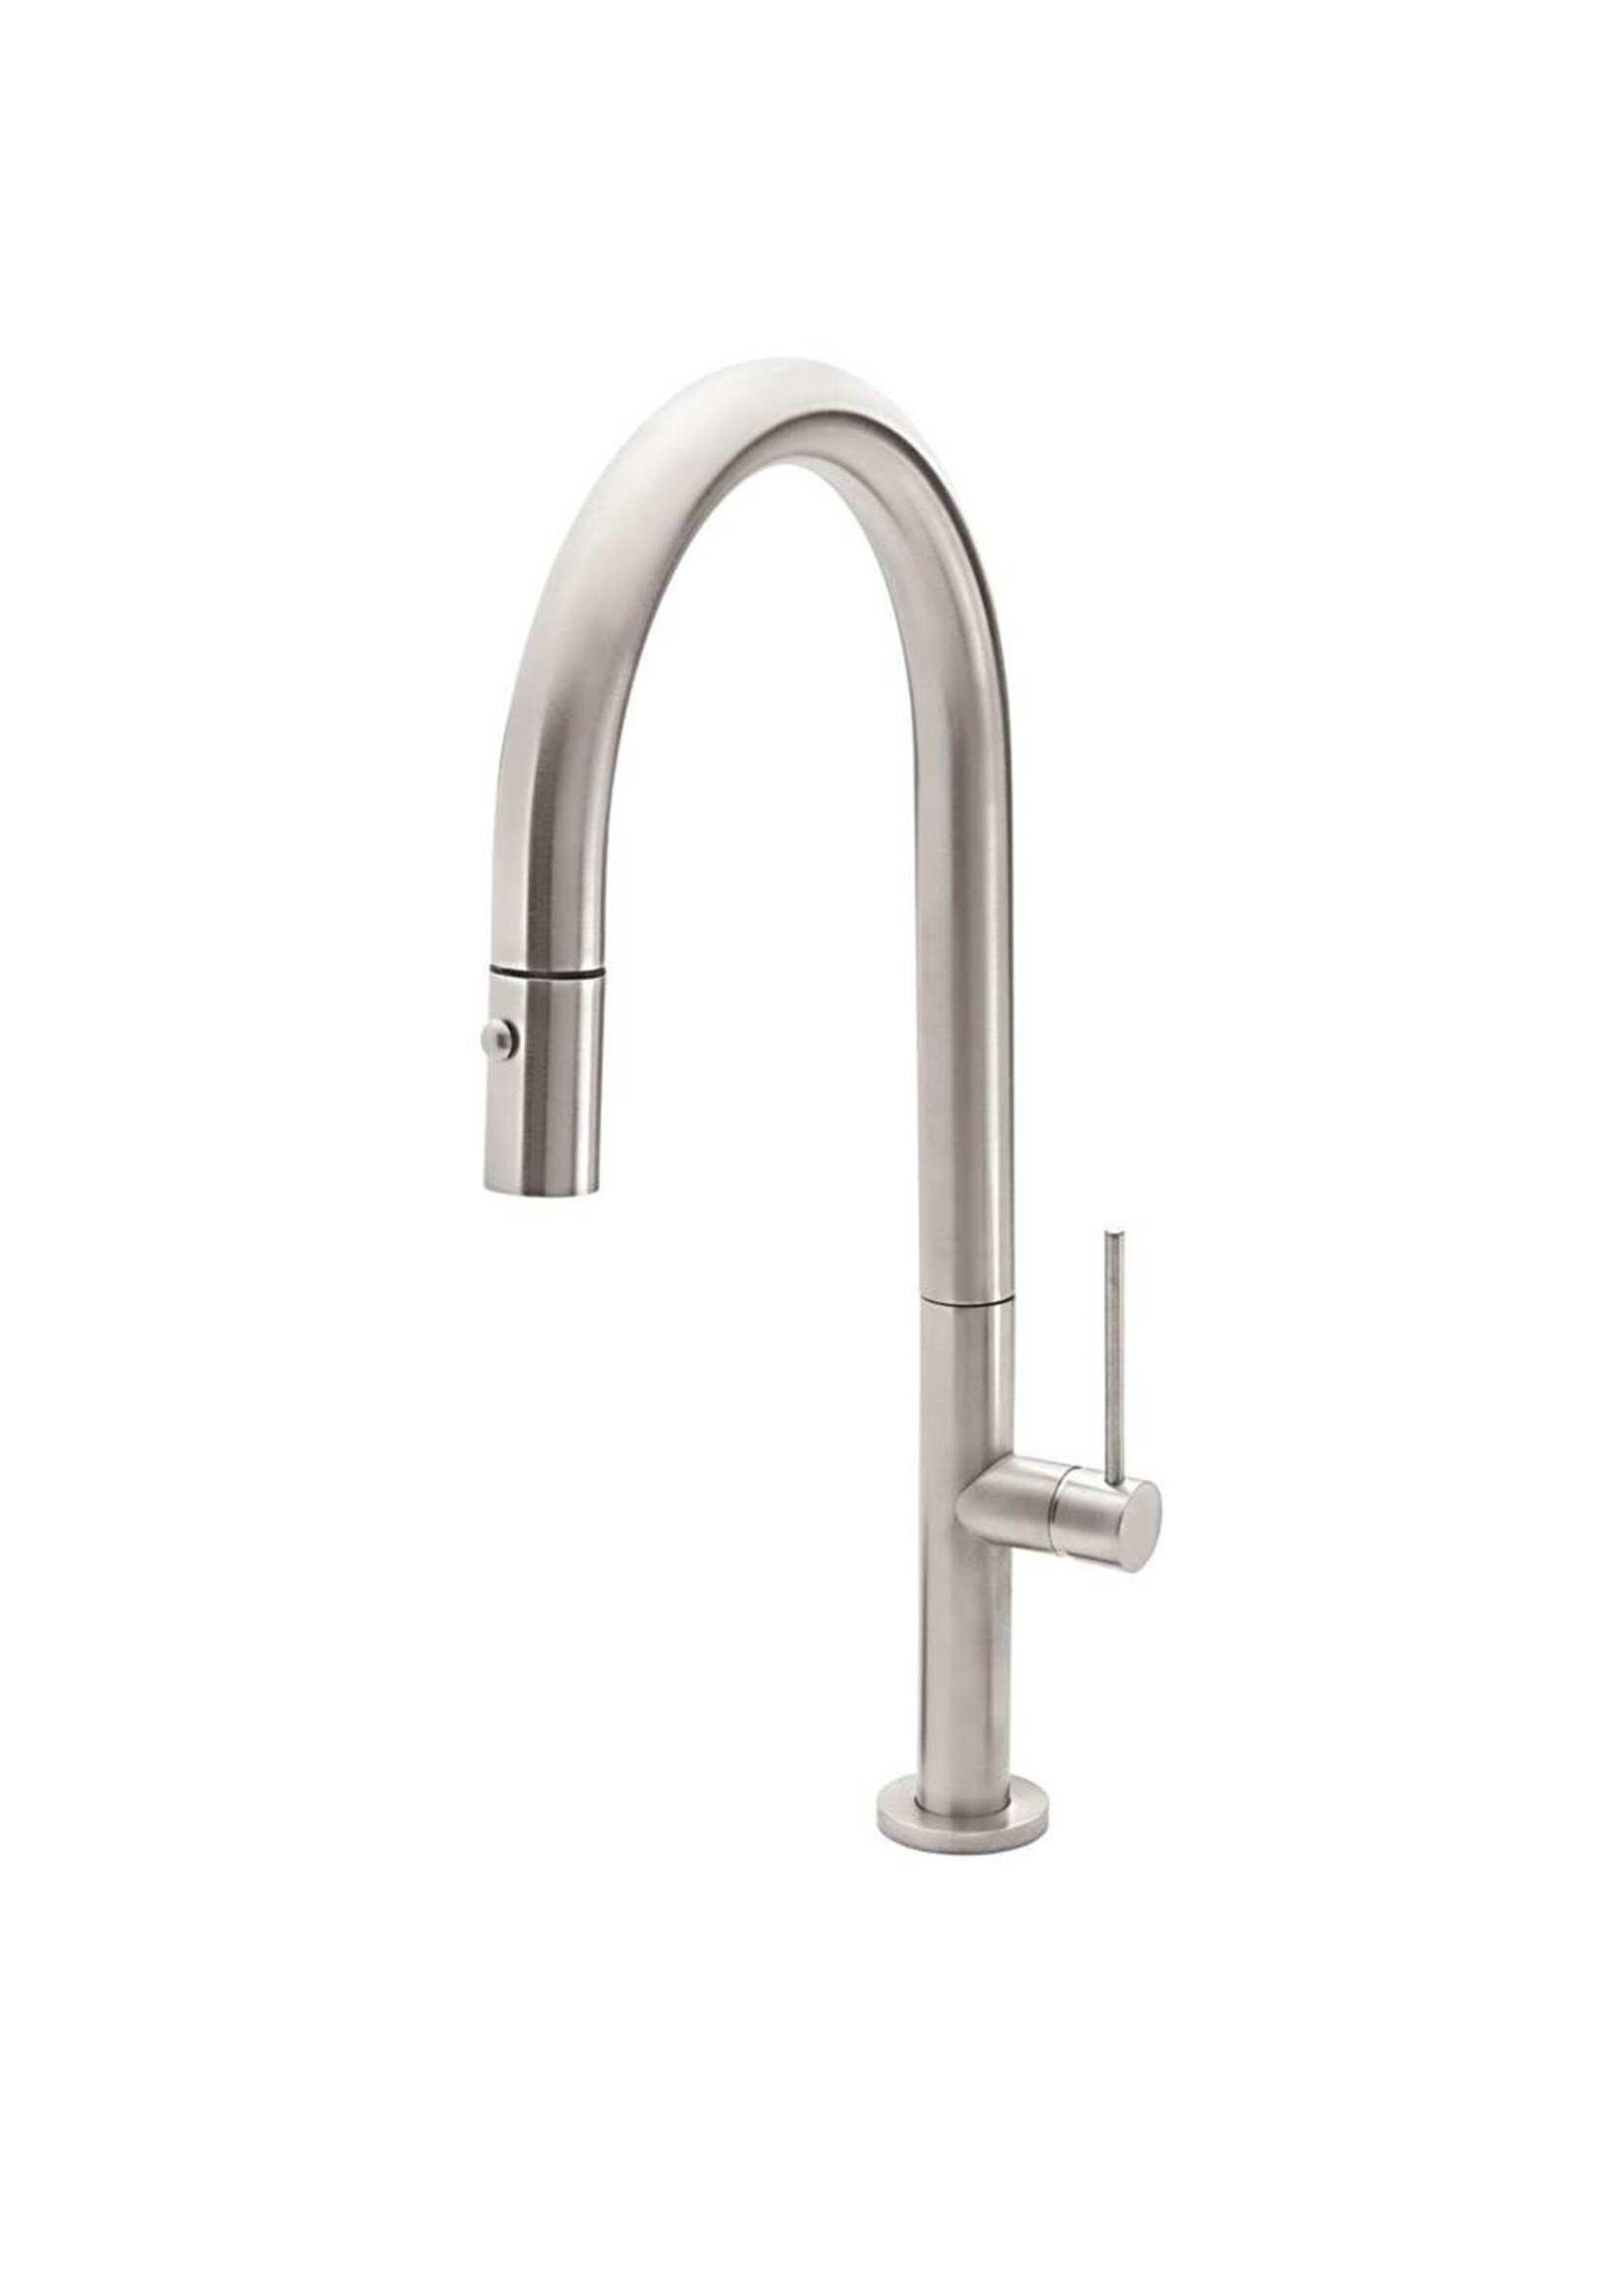 California Faucets California Faucet Poetto High Arc Pull-Down Kitchen Faucet - Special Finish